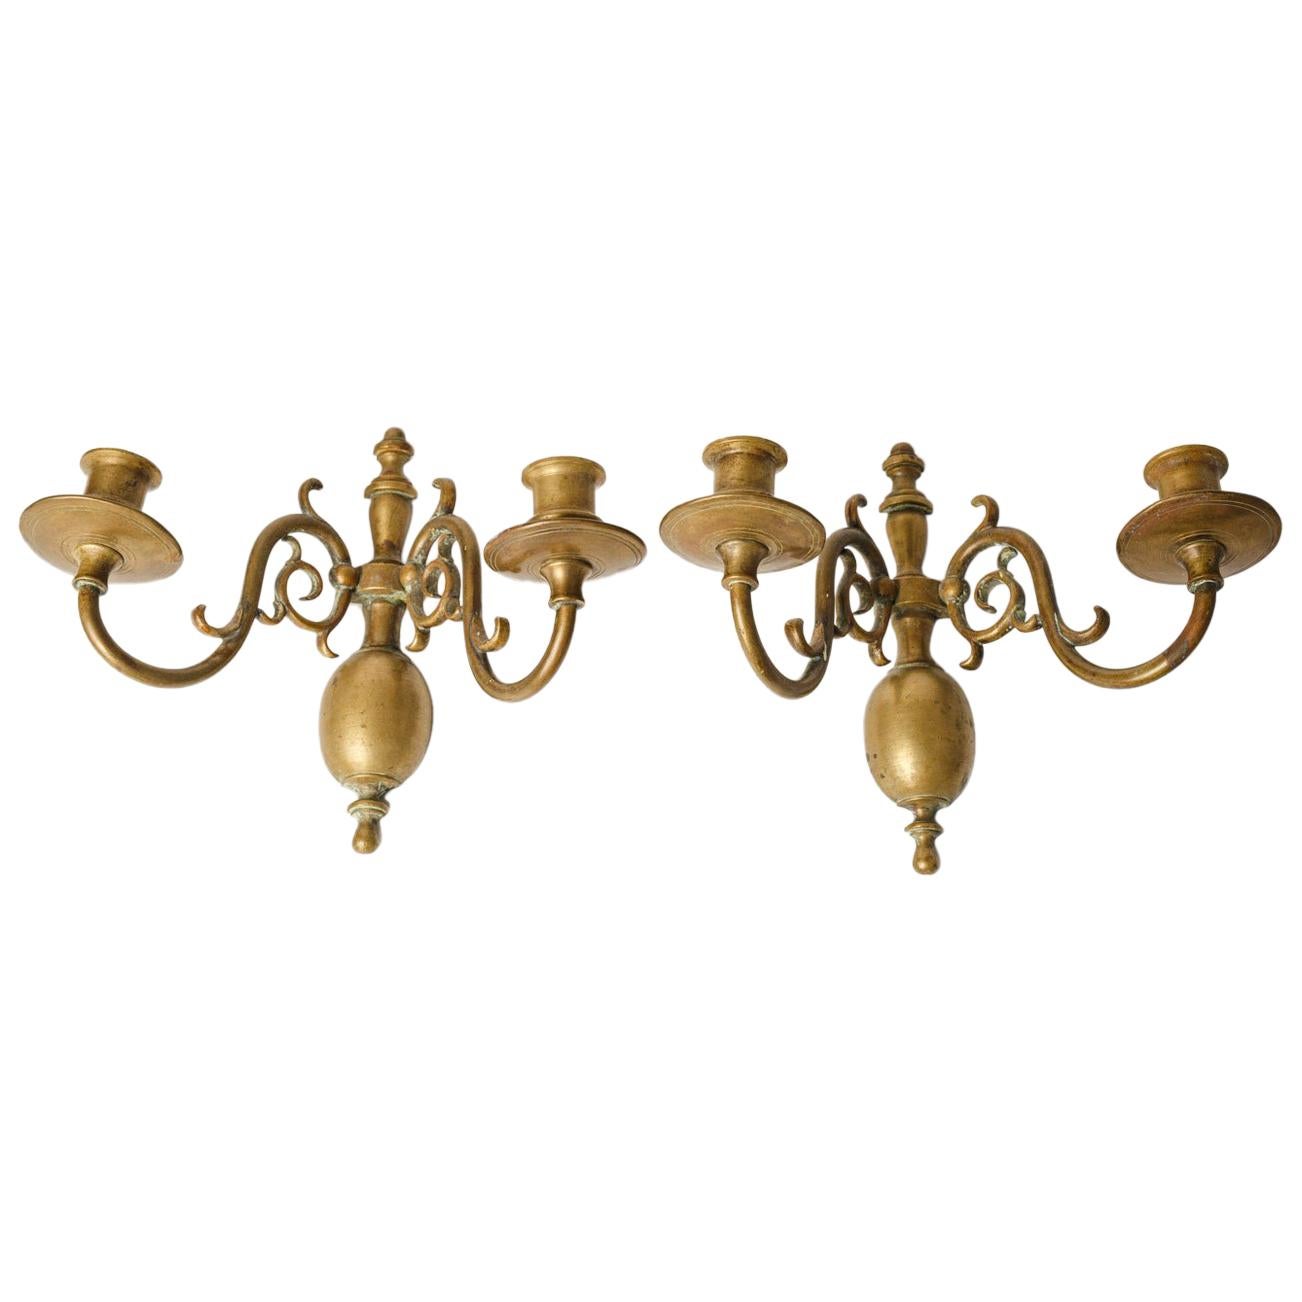 Pair of Smaller-Scale Brass Sconces